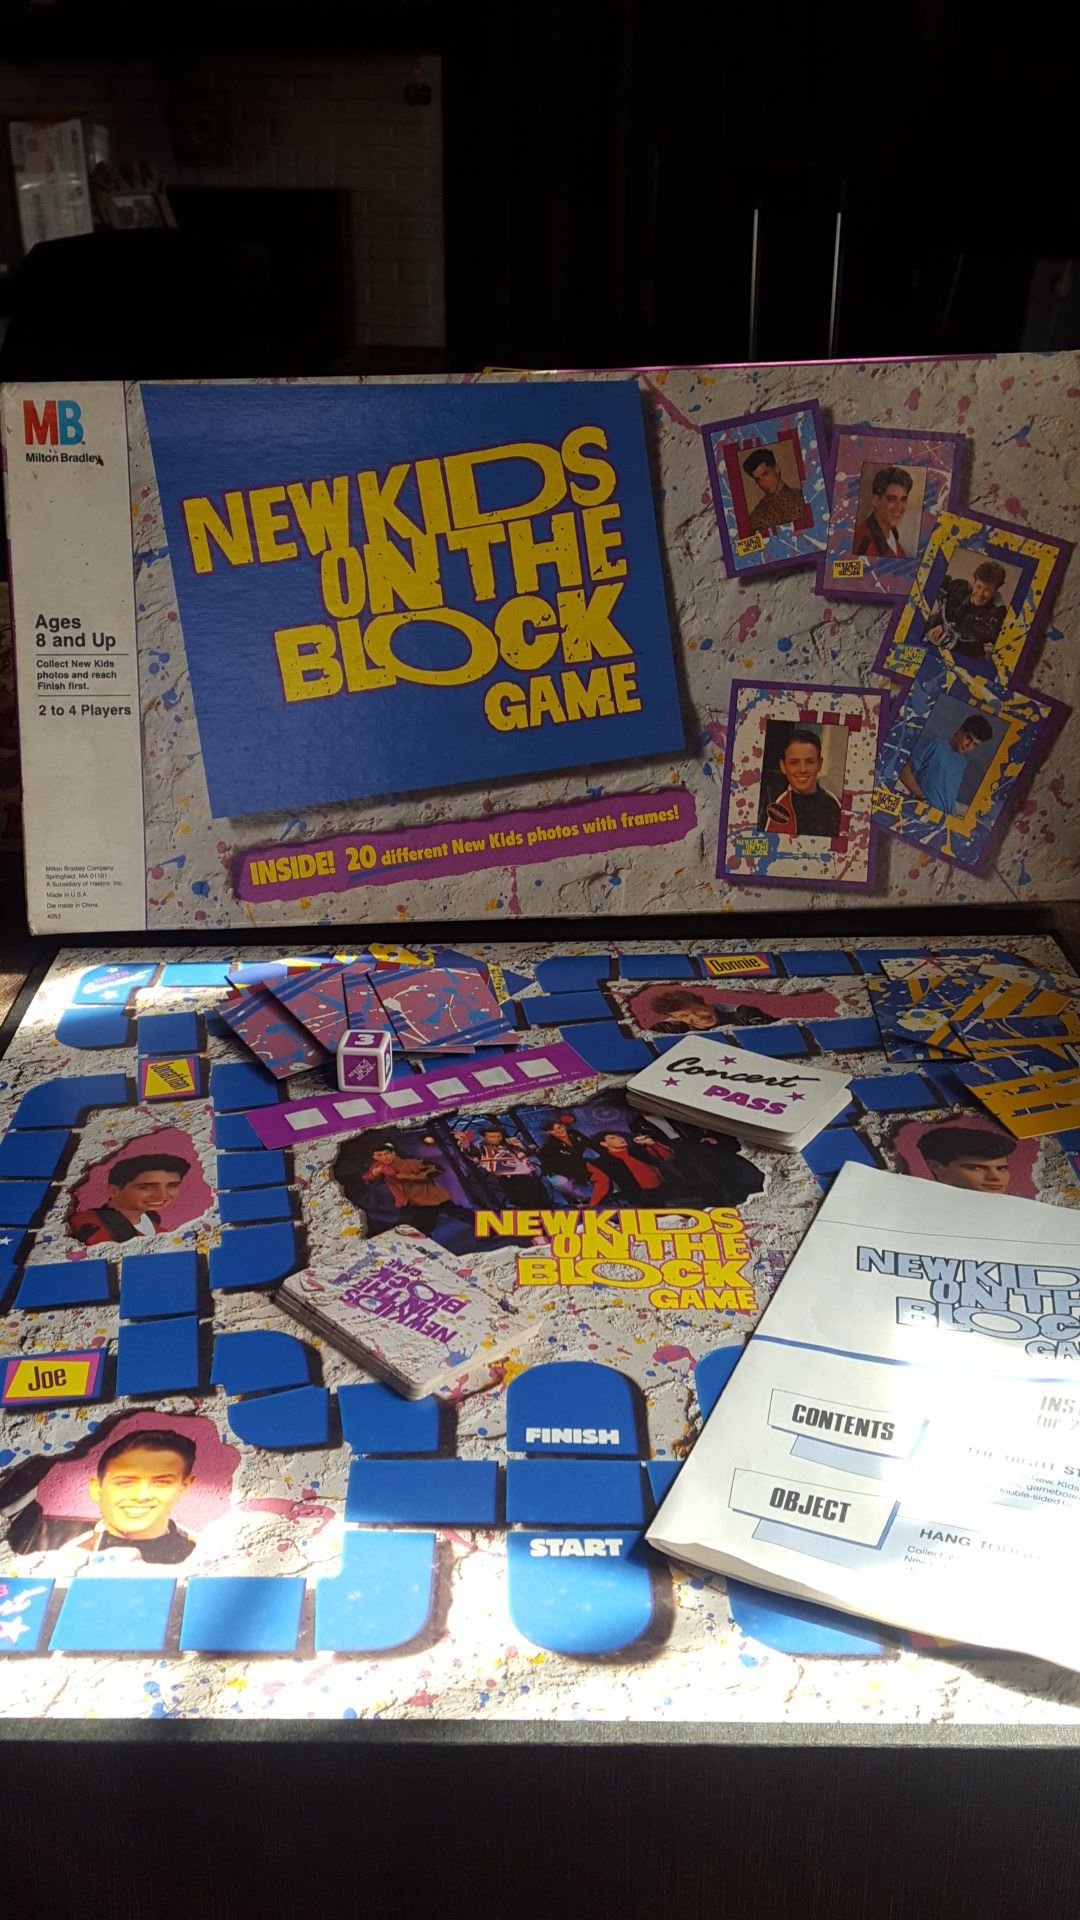 New Kids on the Block game